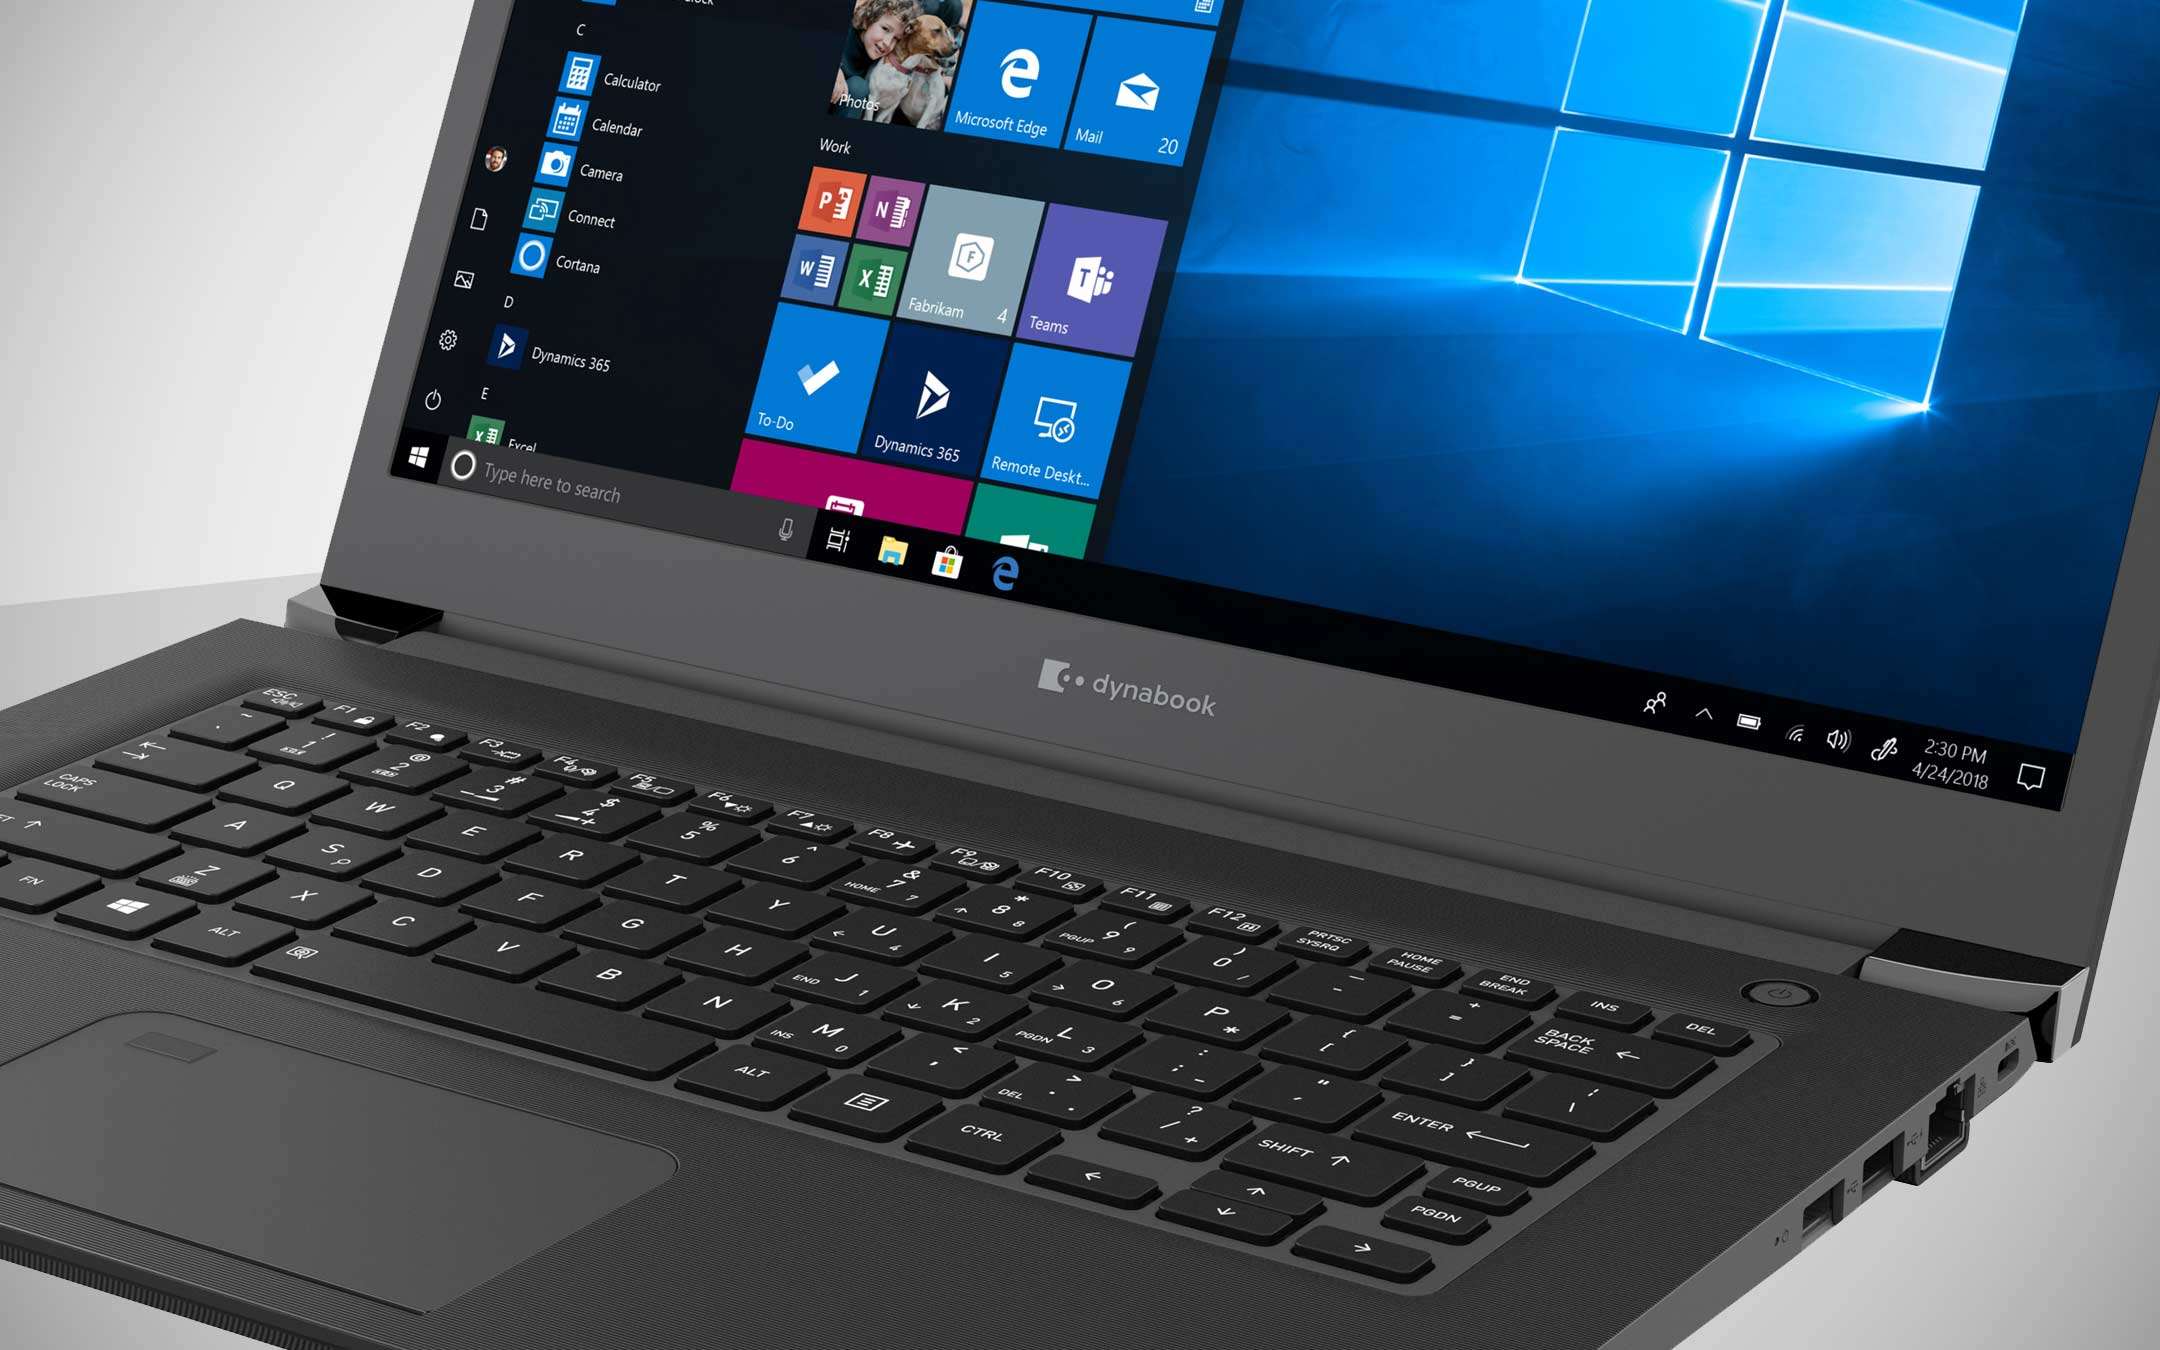 No more laptops for Toshiba: Dynabook is from Sharp